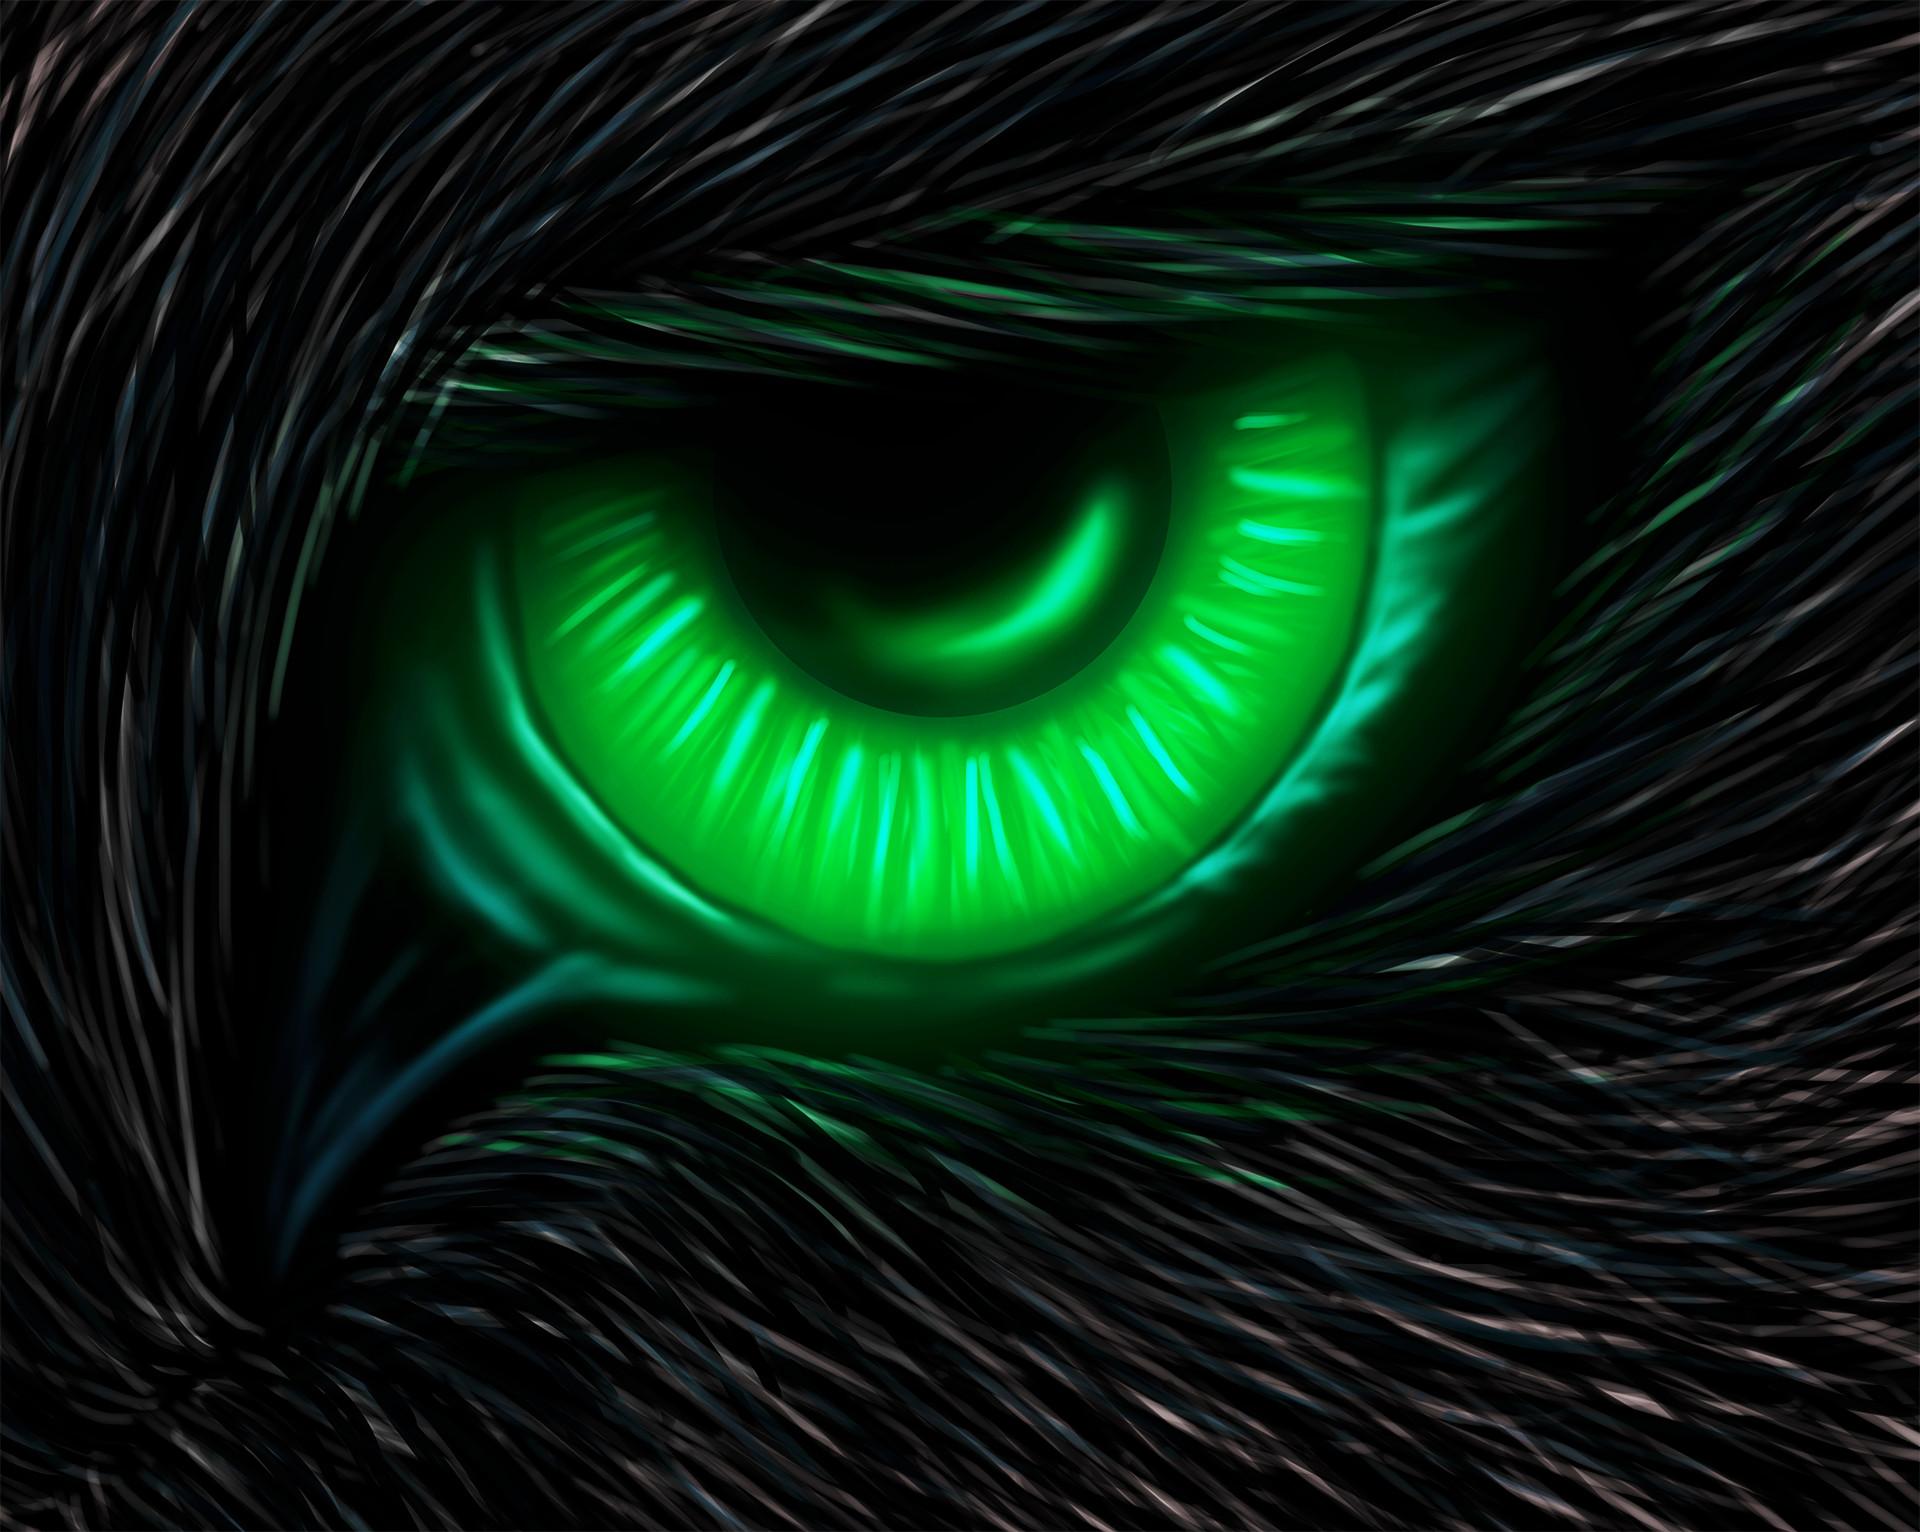 Black Wolf With Green Eyes Wallpaper